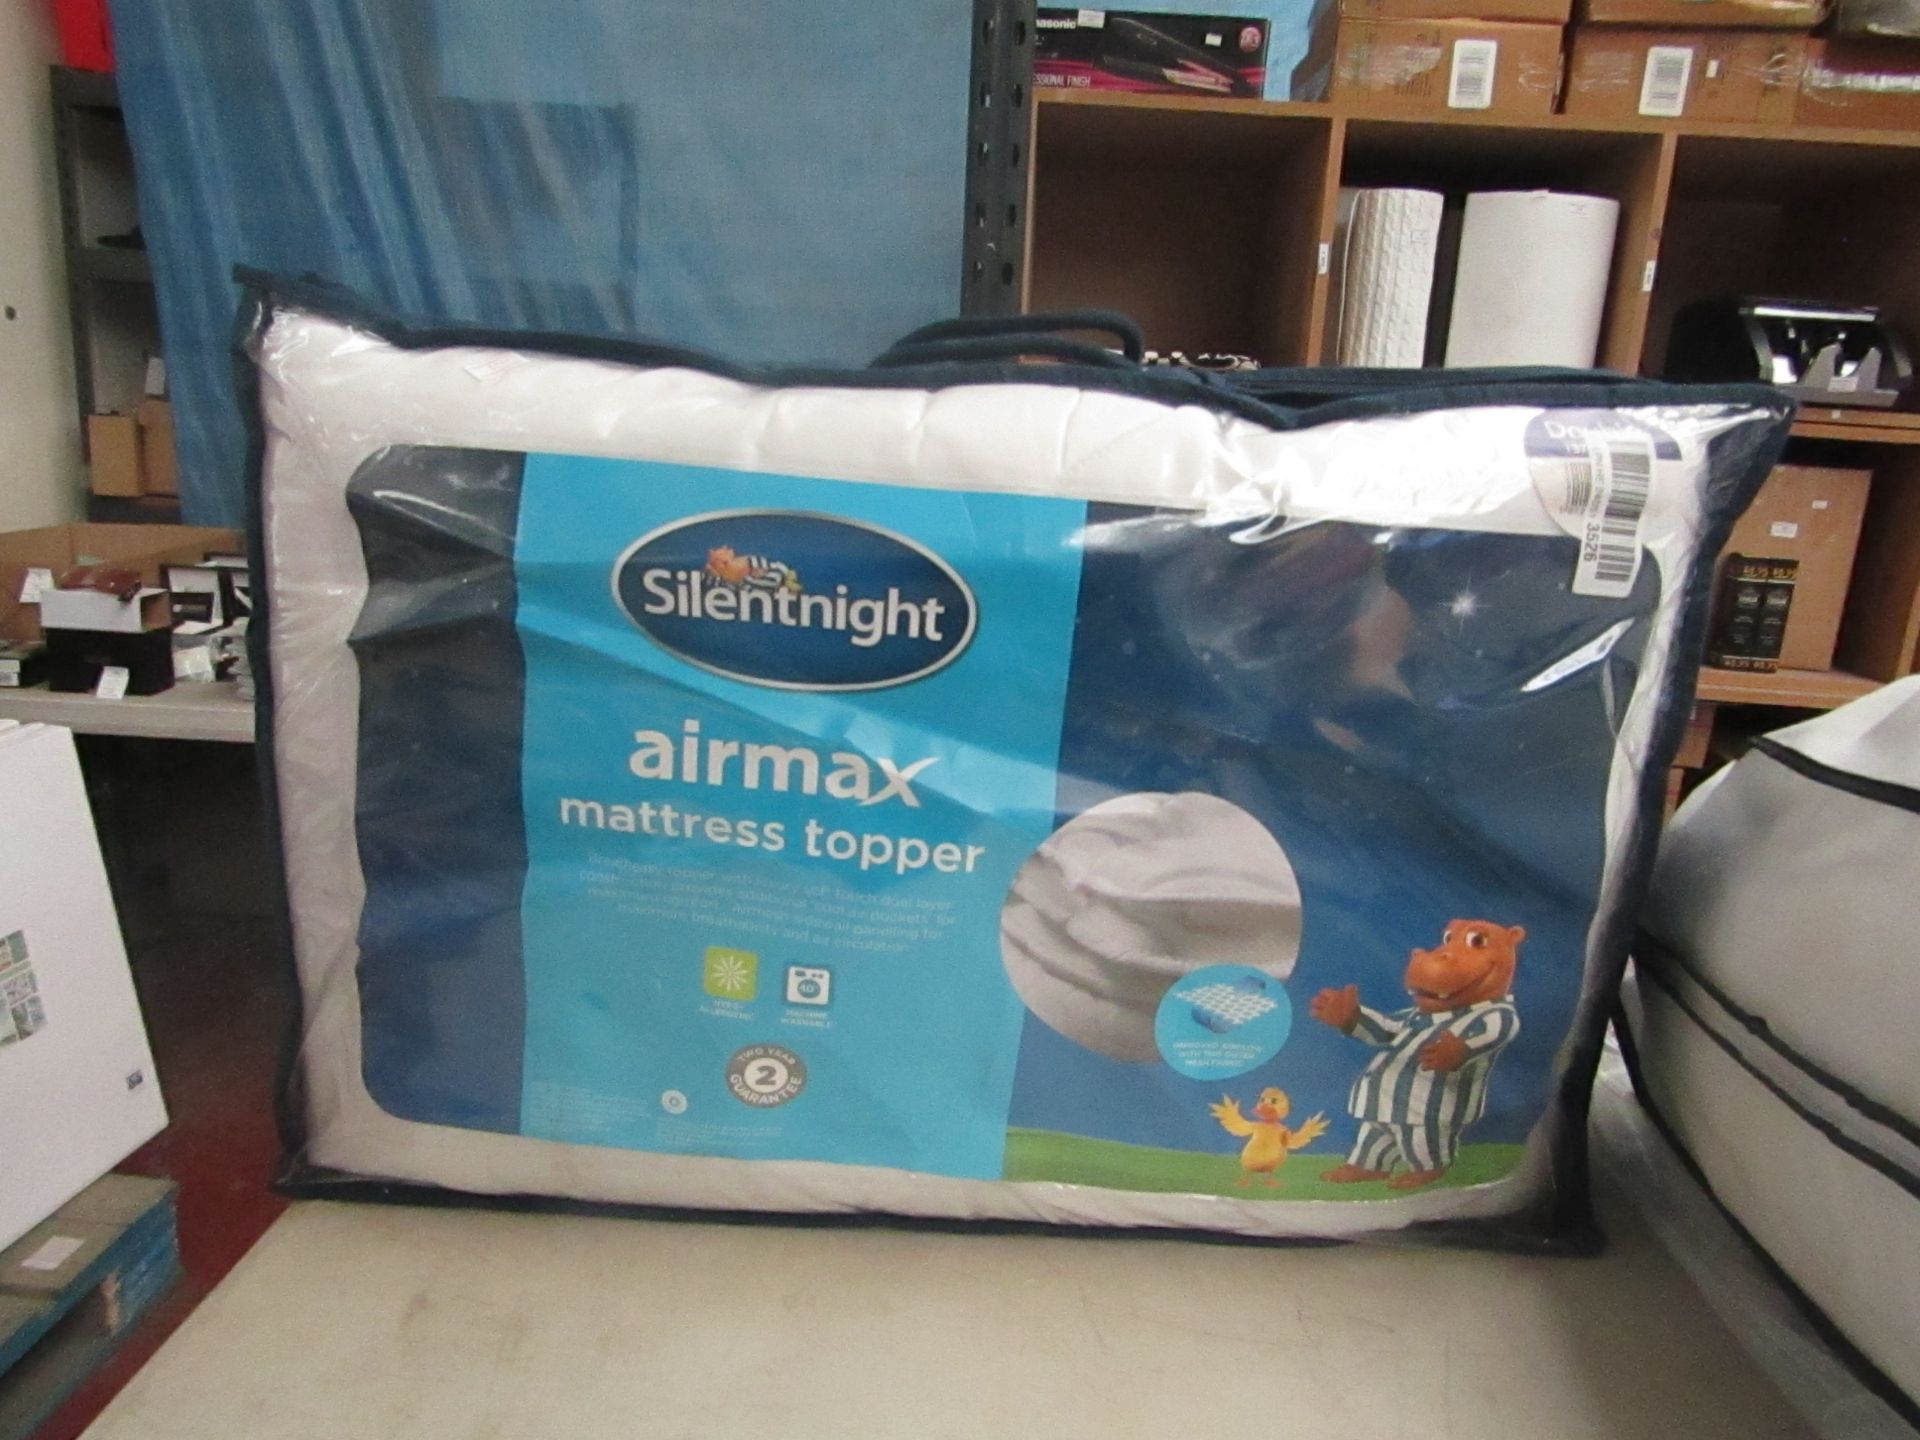 Silentnight Airmax Double Mattress Topper new in carry case